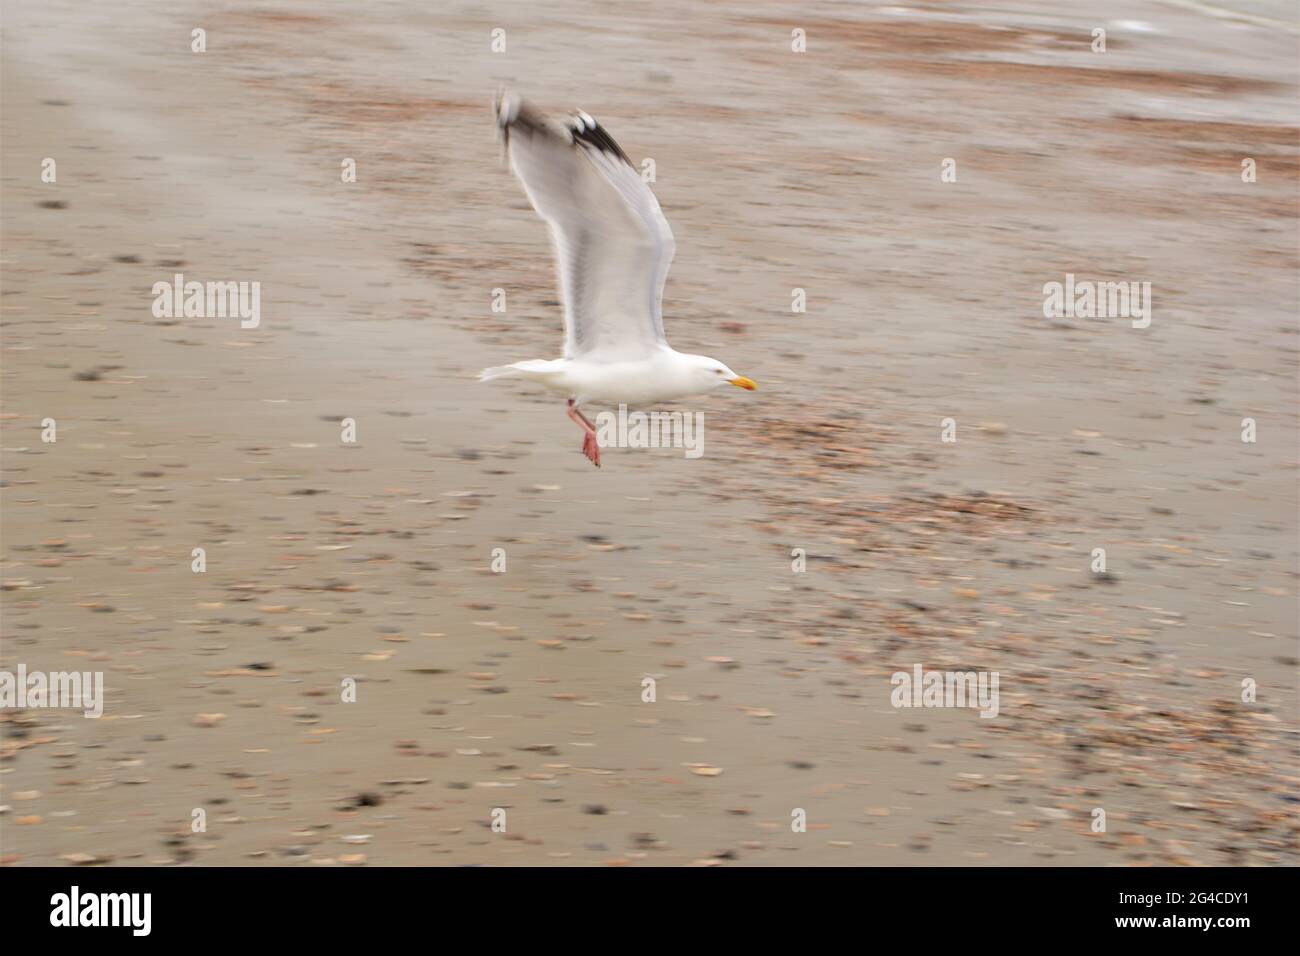 A seagull is flying above the beach Stock Photo